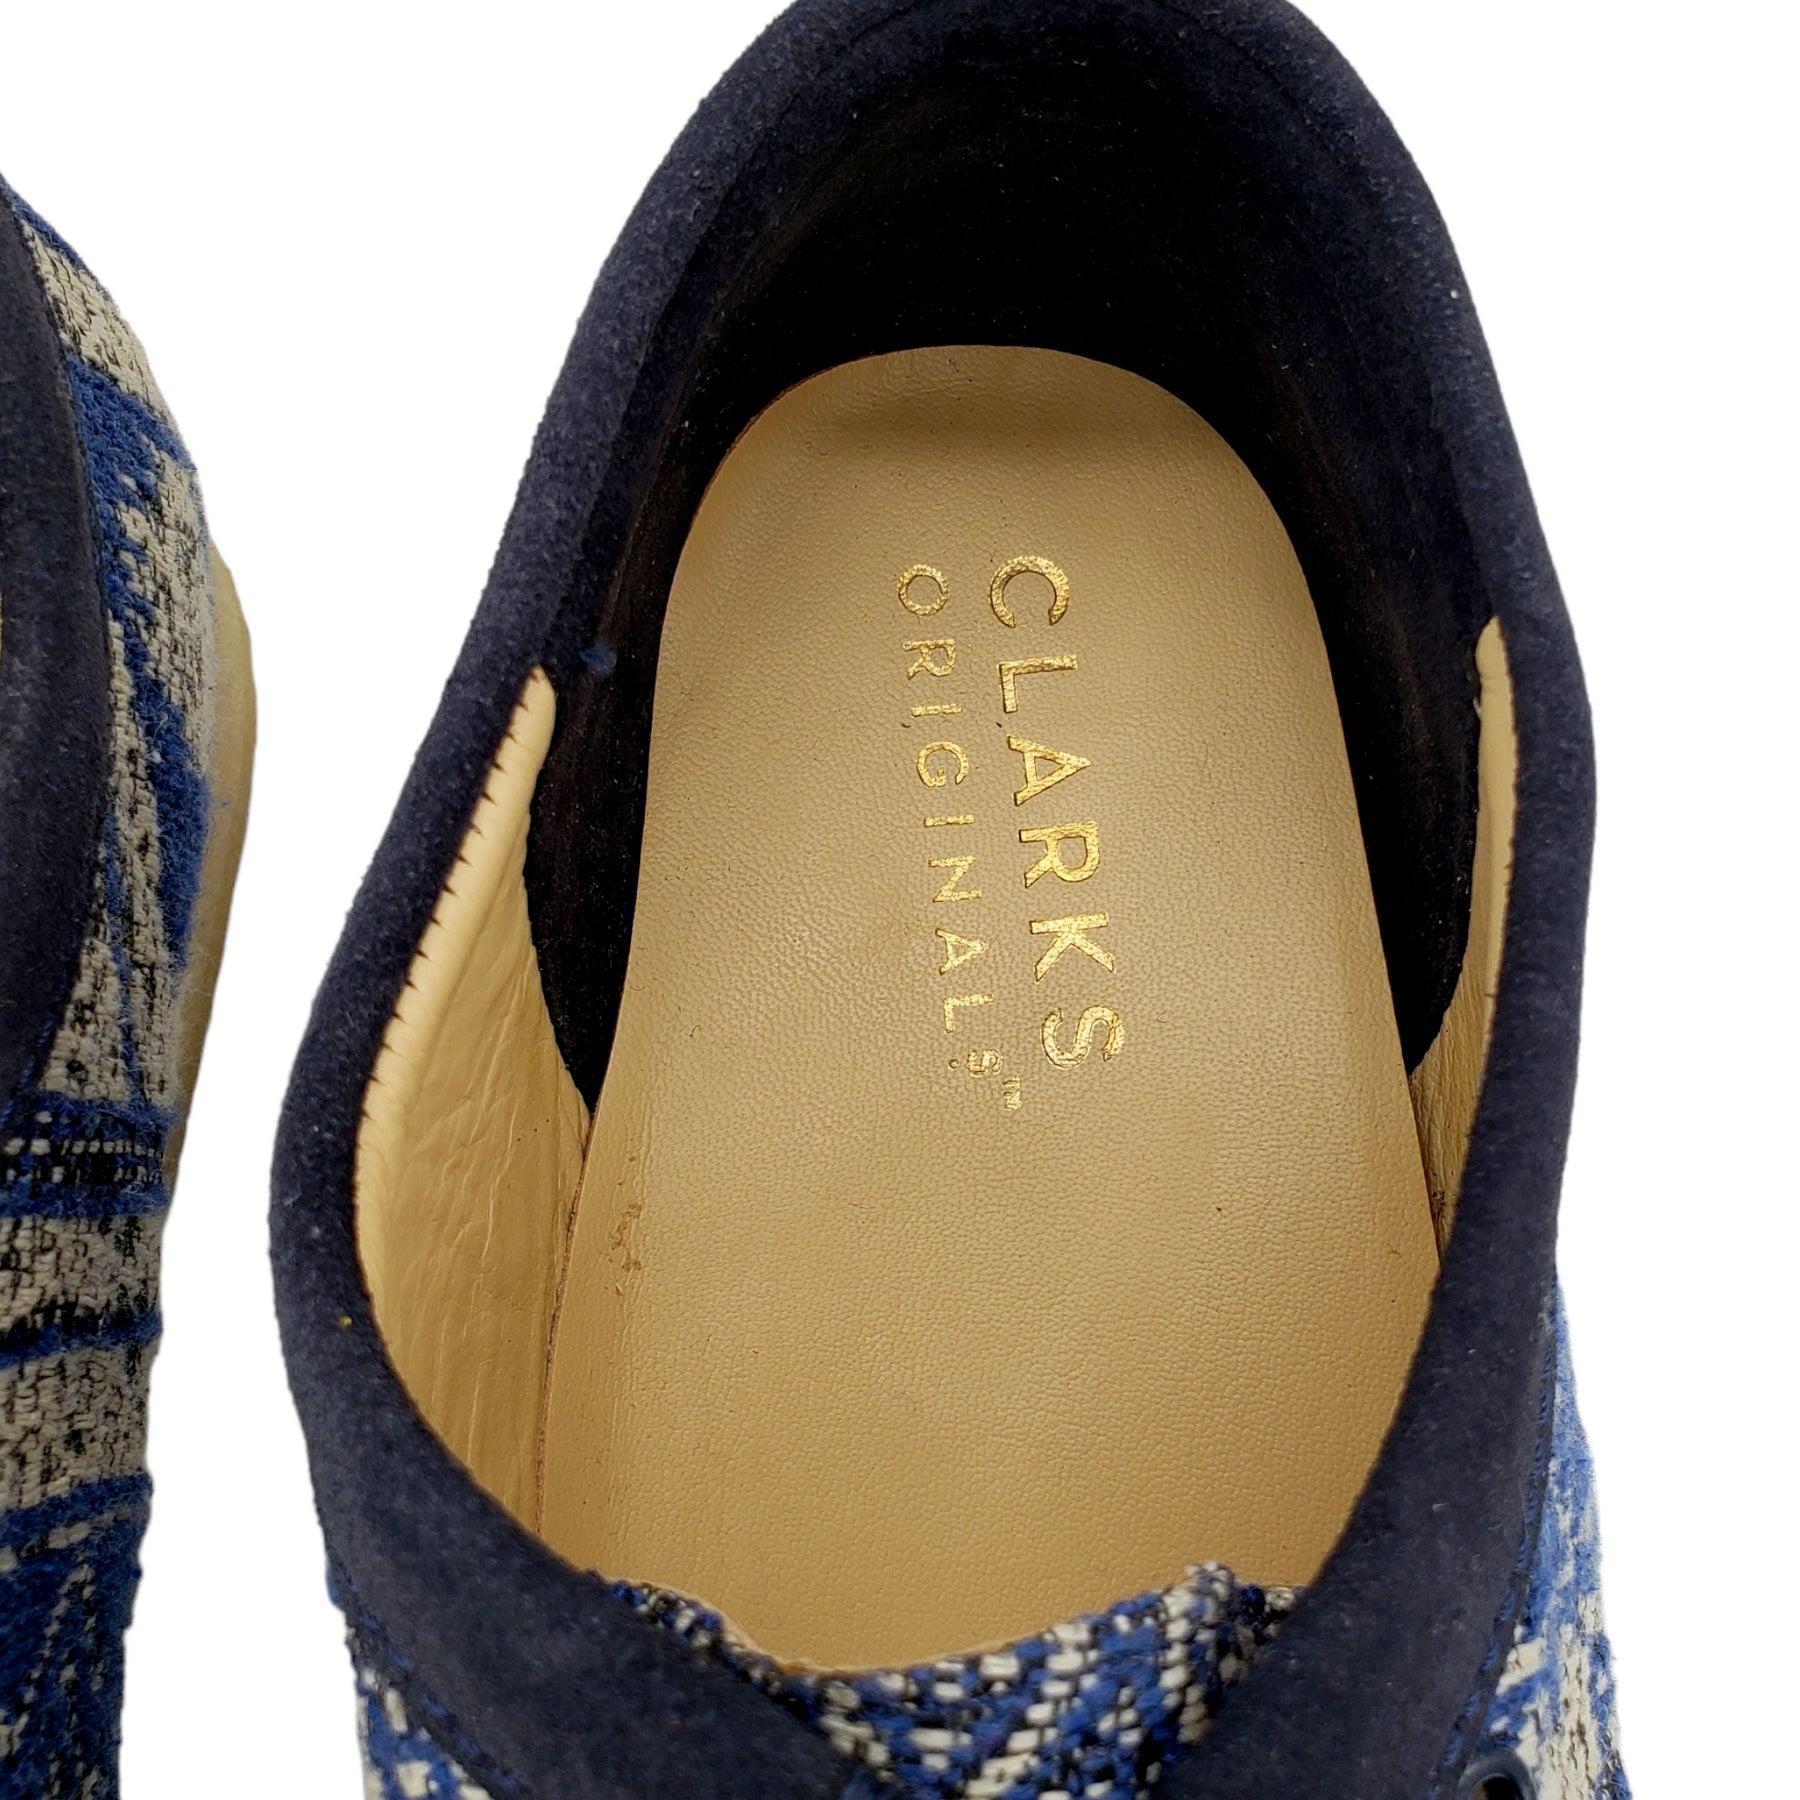 Clarks Wallabies Blue & White Tapestry Boots